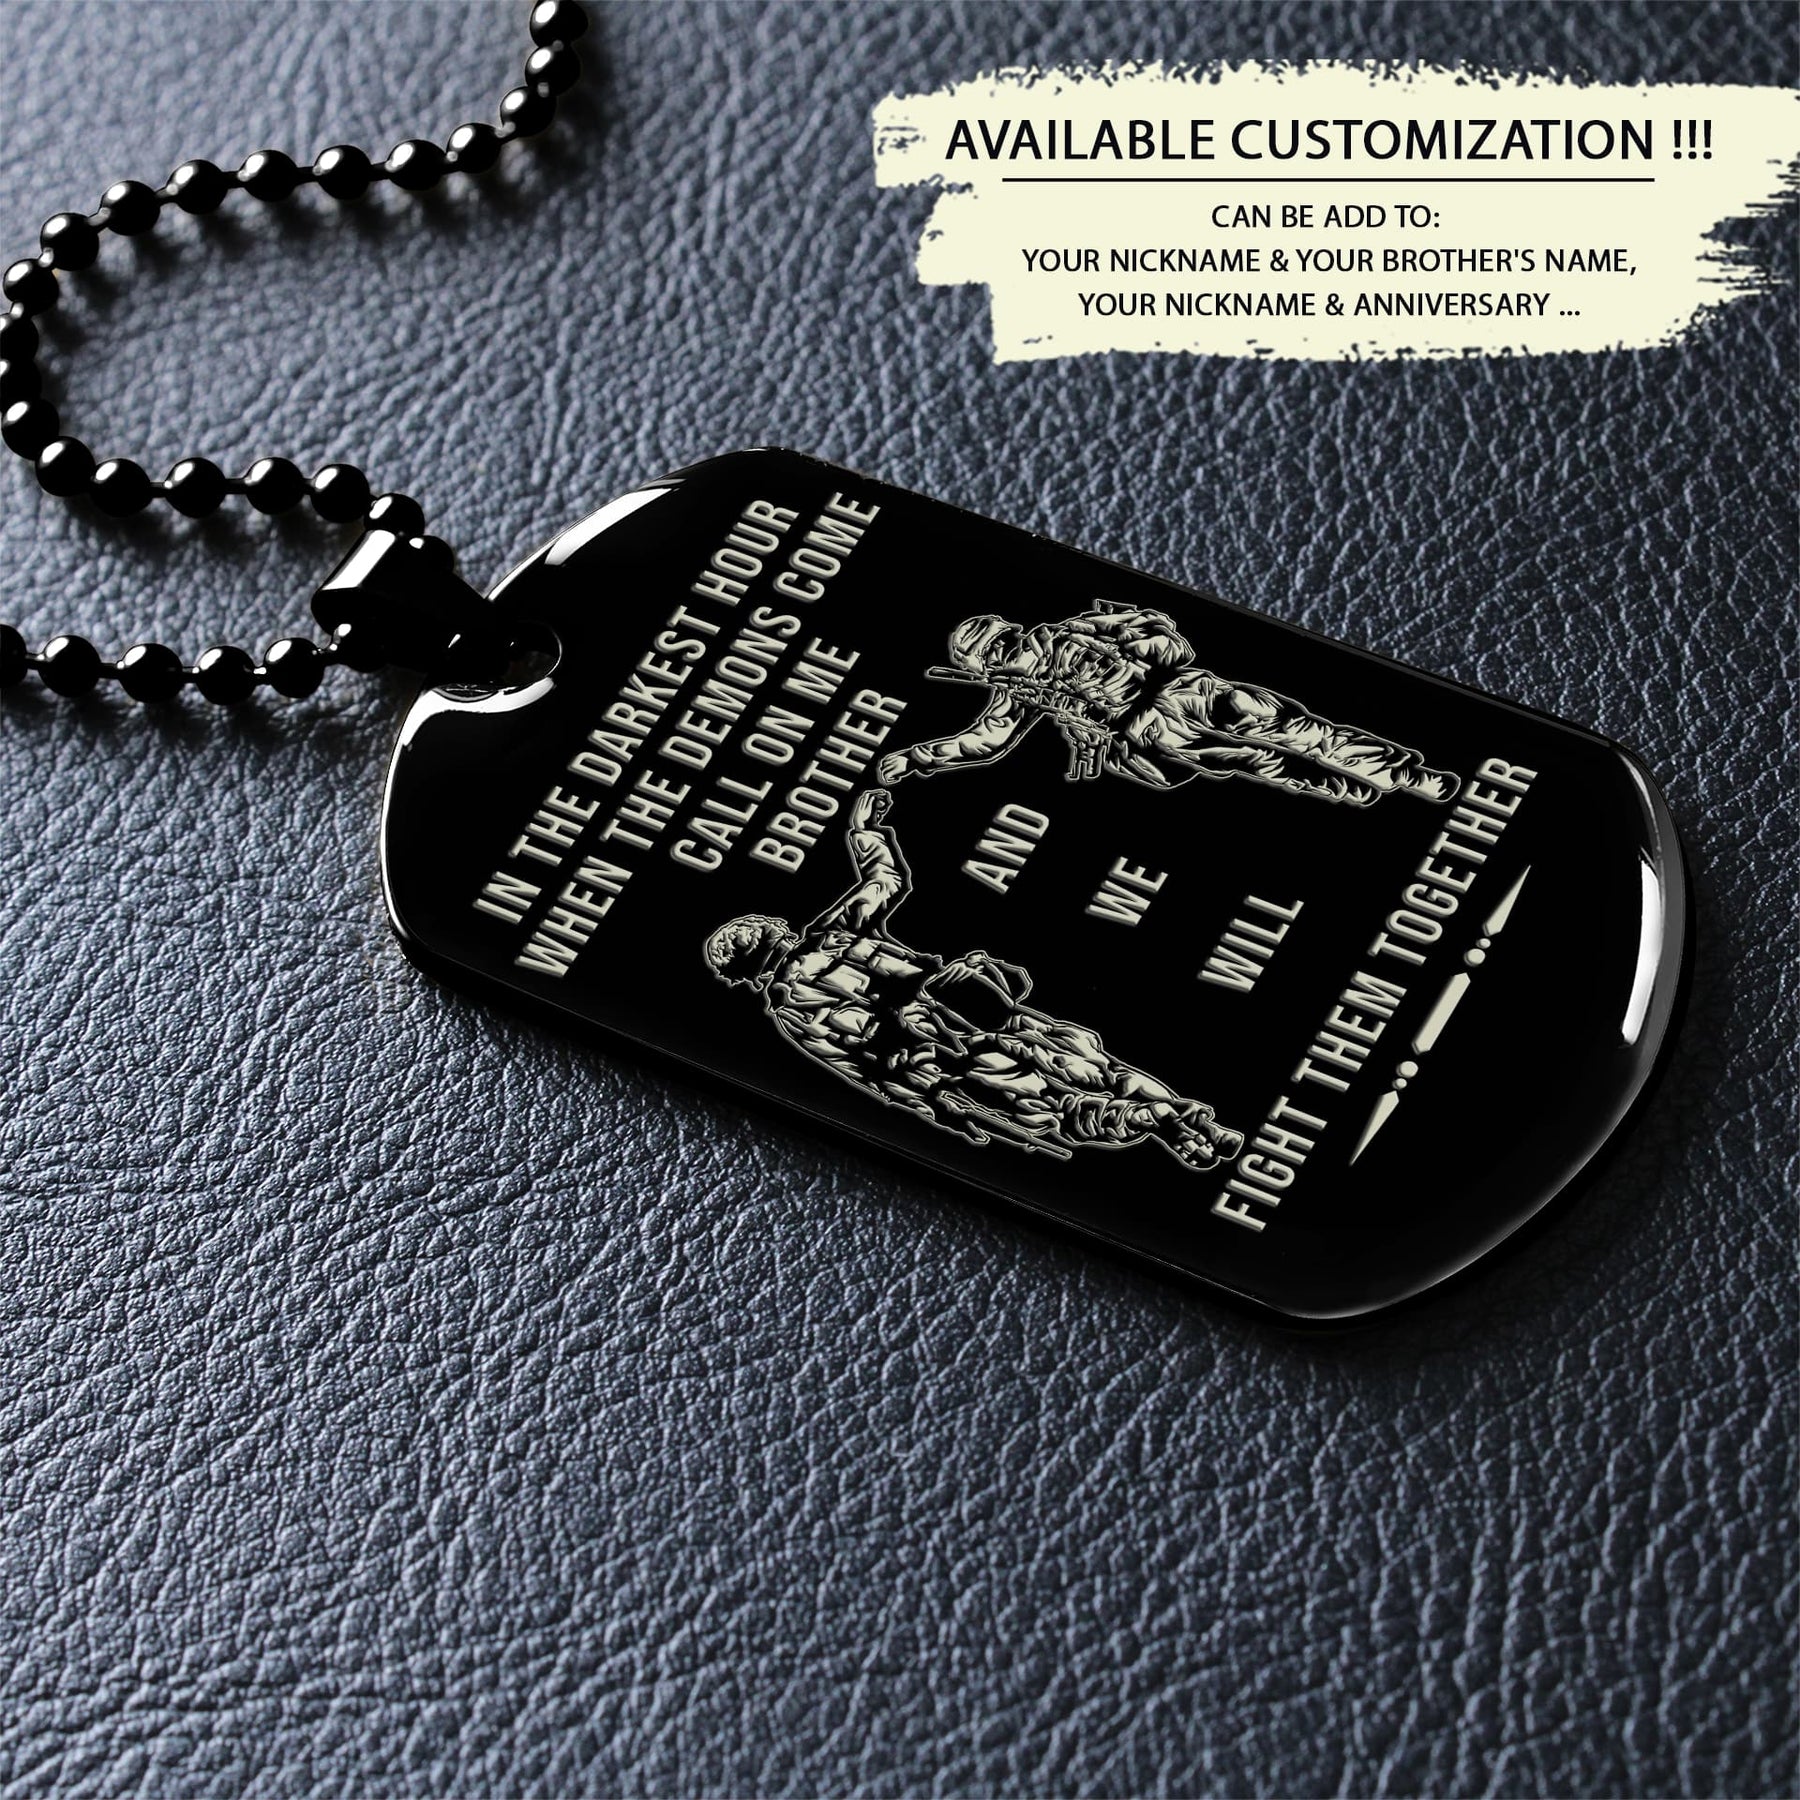 SDD039 - Call On Me Brother - It's About Being Better Than You Were The Day Before - Army - Marine - Soldier Dog Tag - Double Side Black Dog Tag